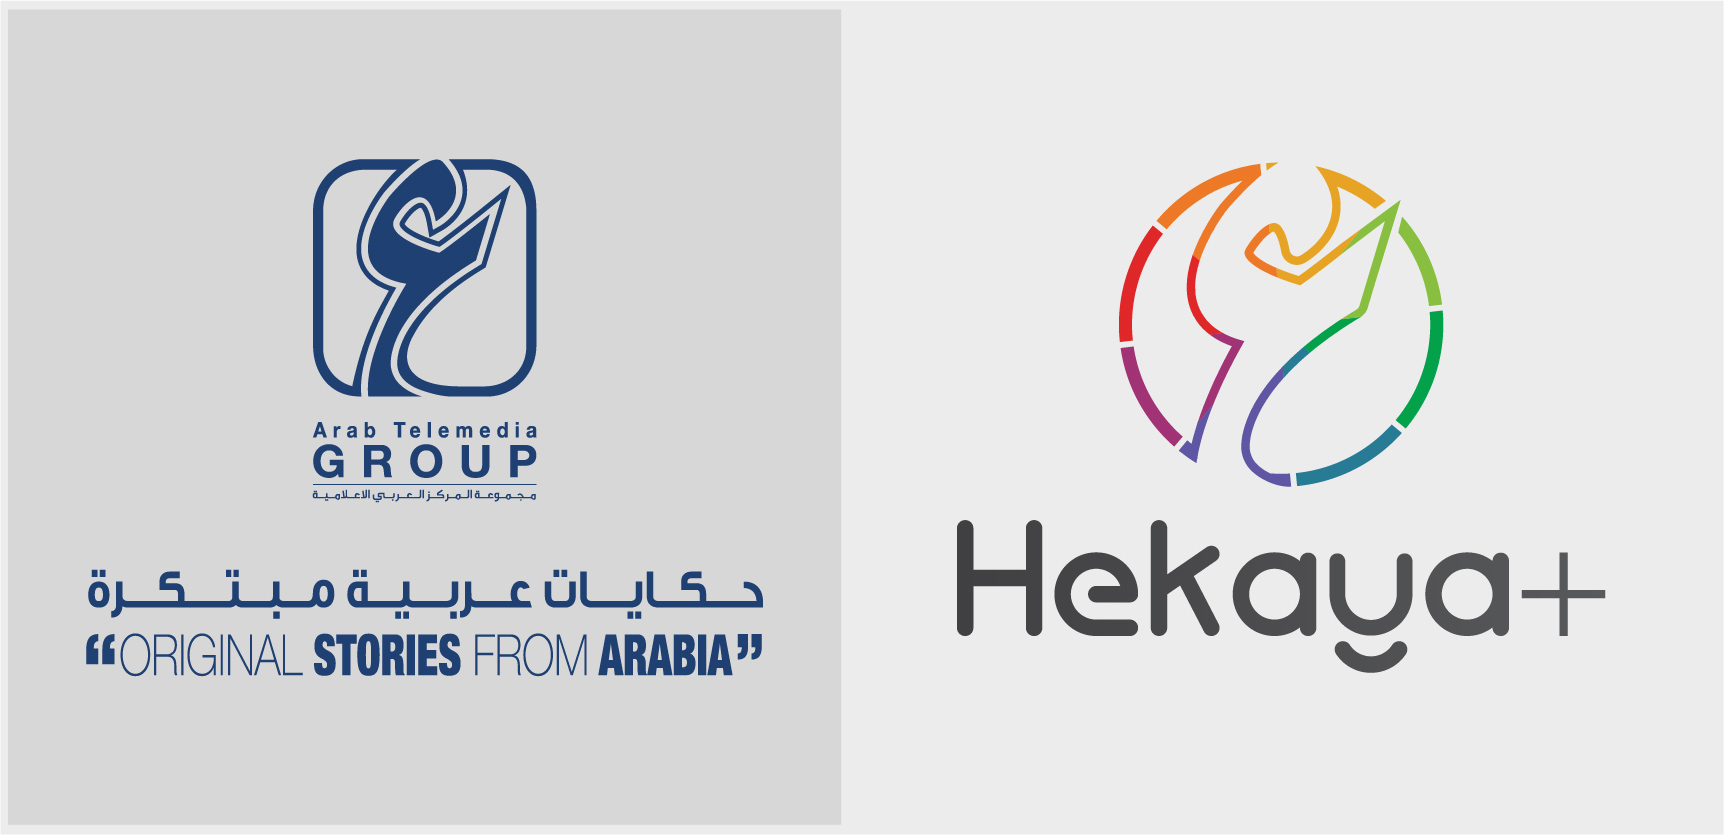  Arab Telemedia to launch Hekaya+, a new SVOD service for Arab Audiences